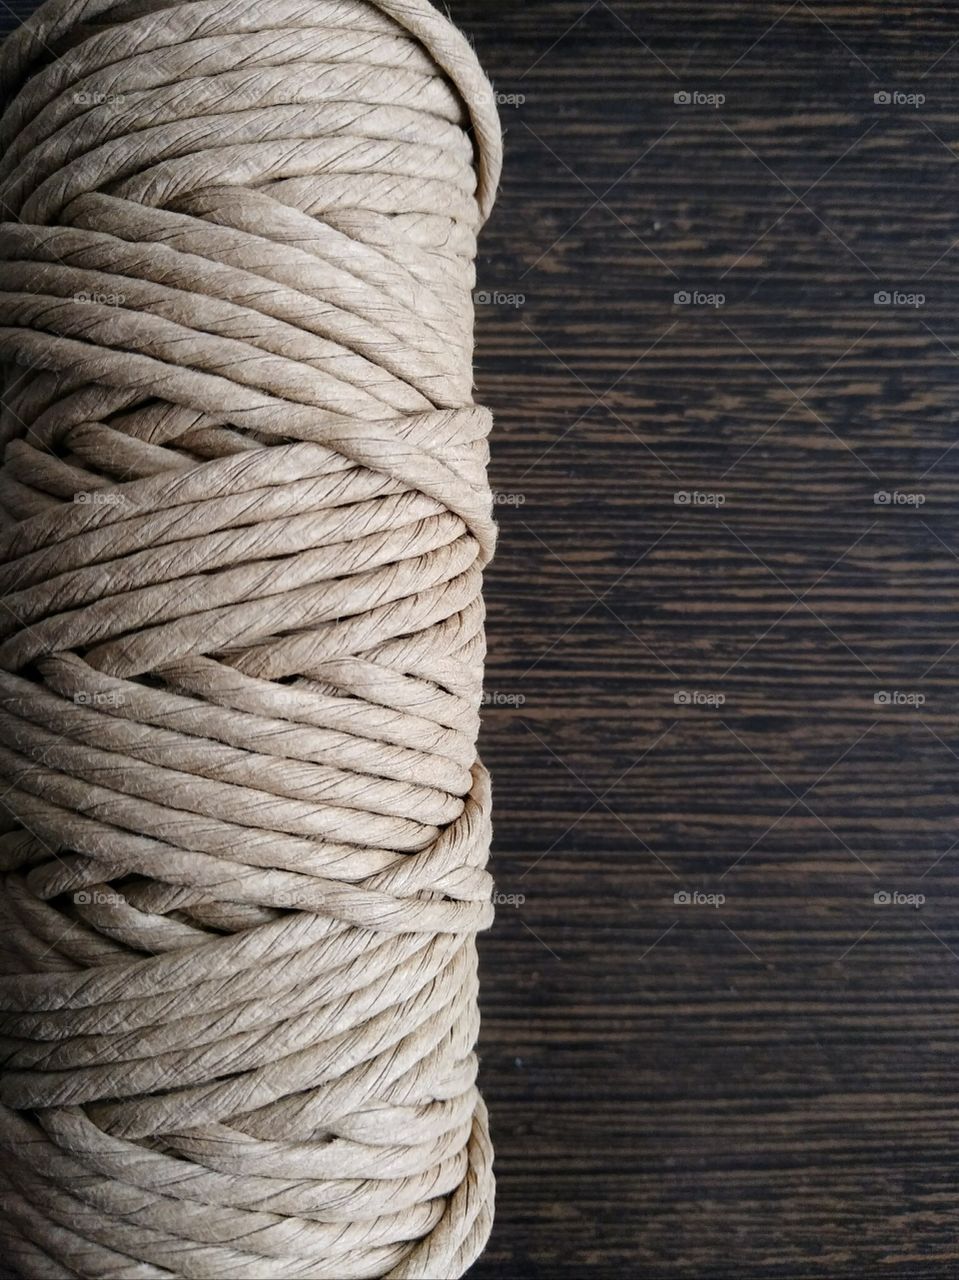 Paper rope on wooden table. Texture.